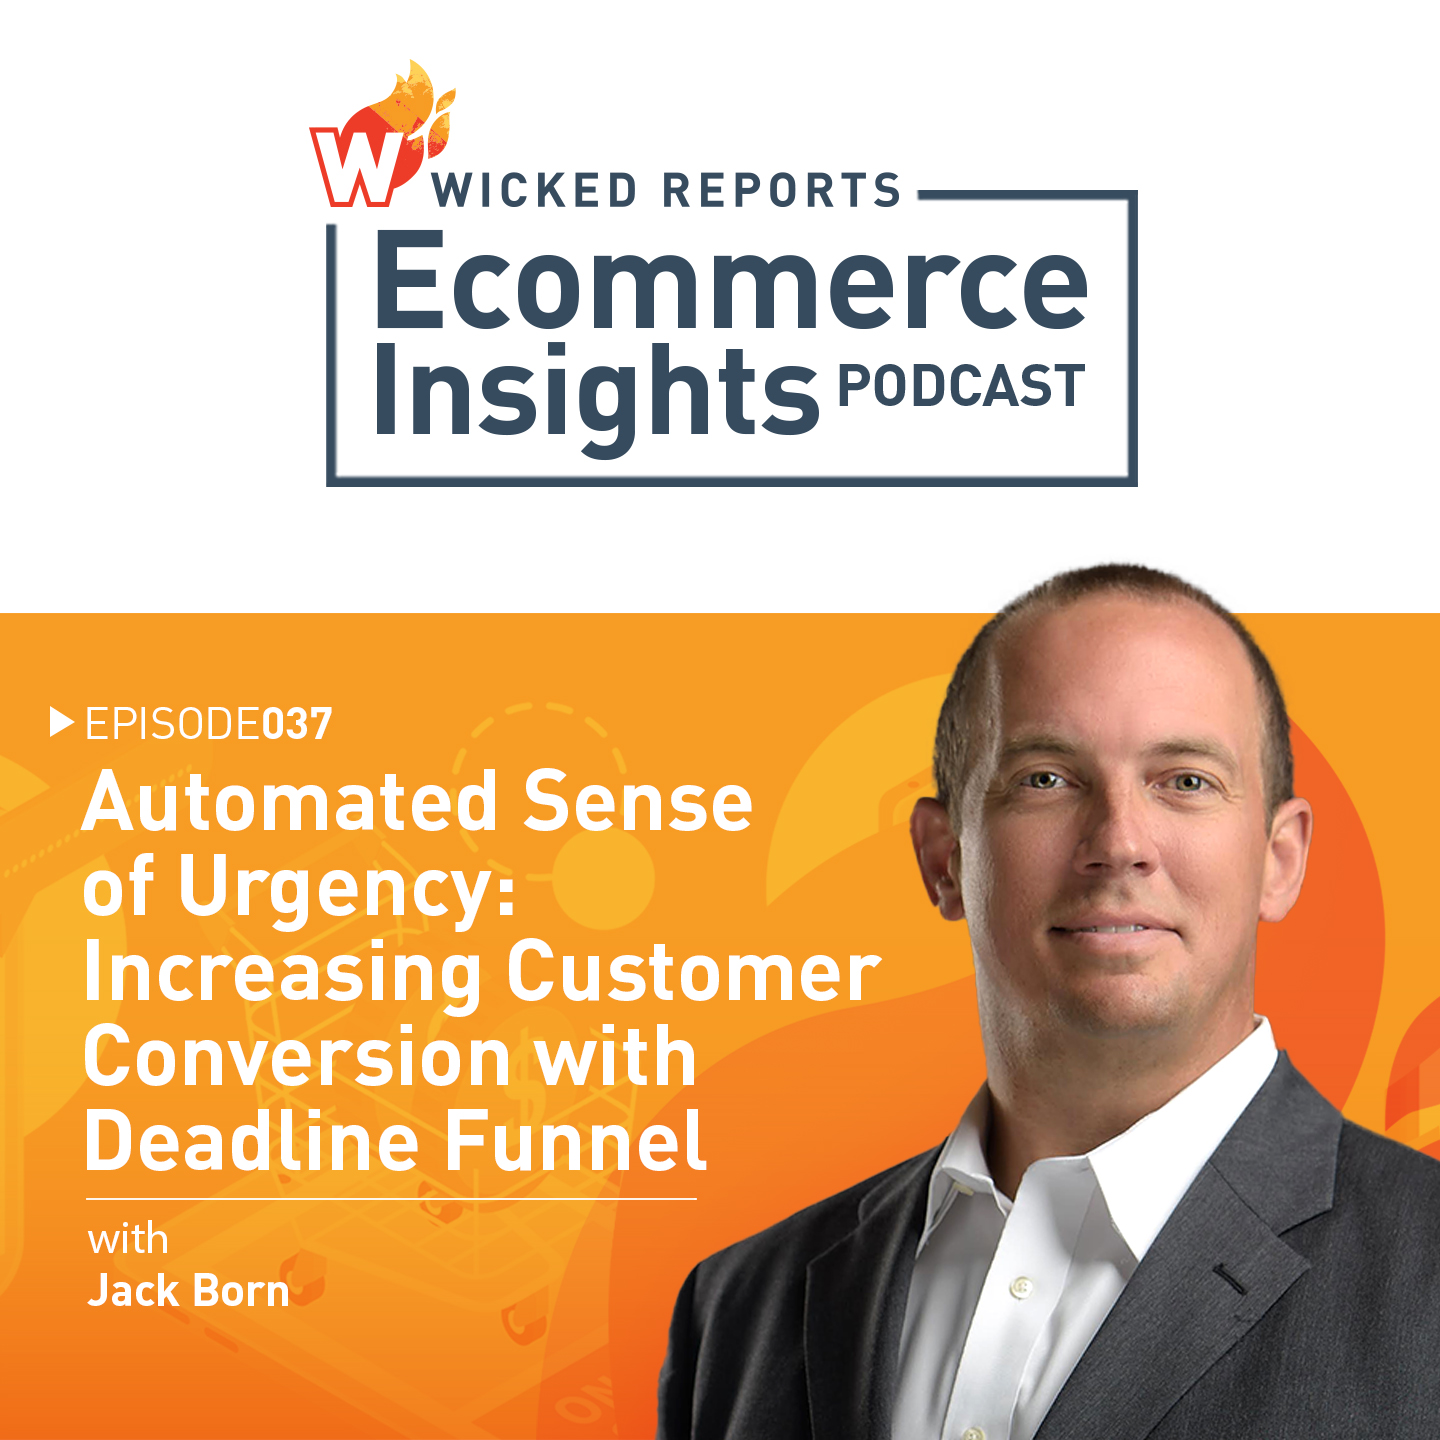 Automated Sense of Urgency: Increasing Customer Conversion with Deadline Funnel